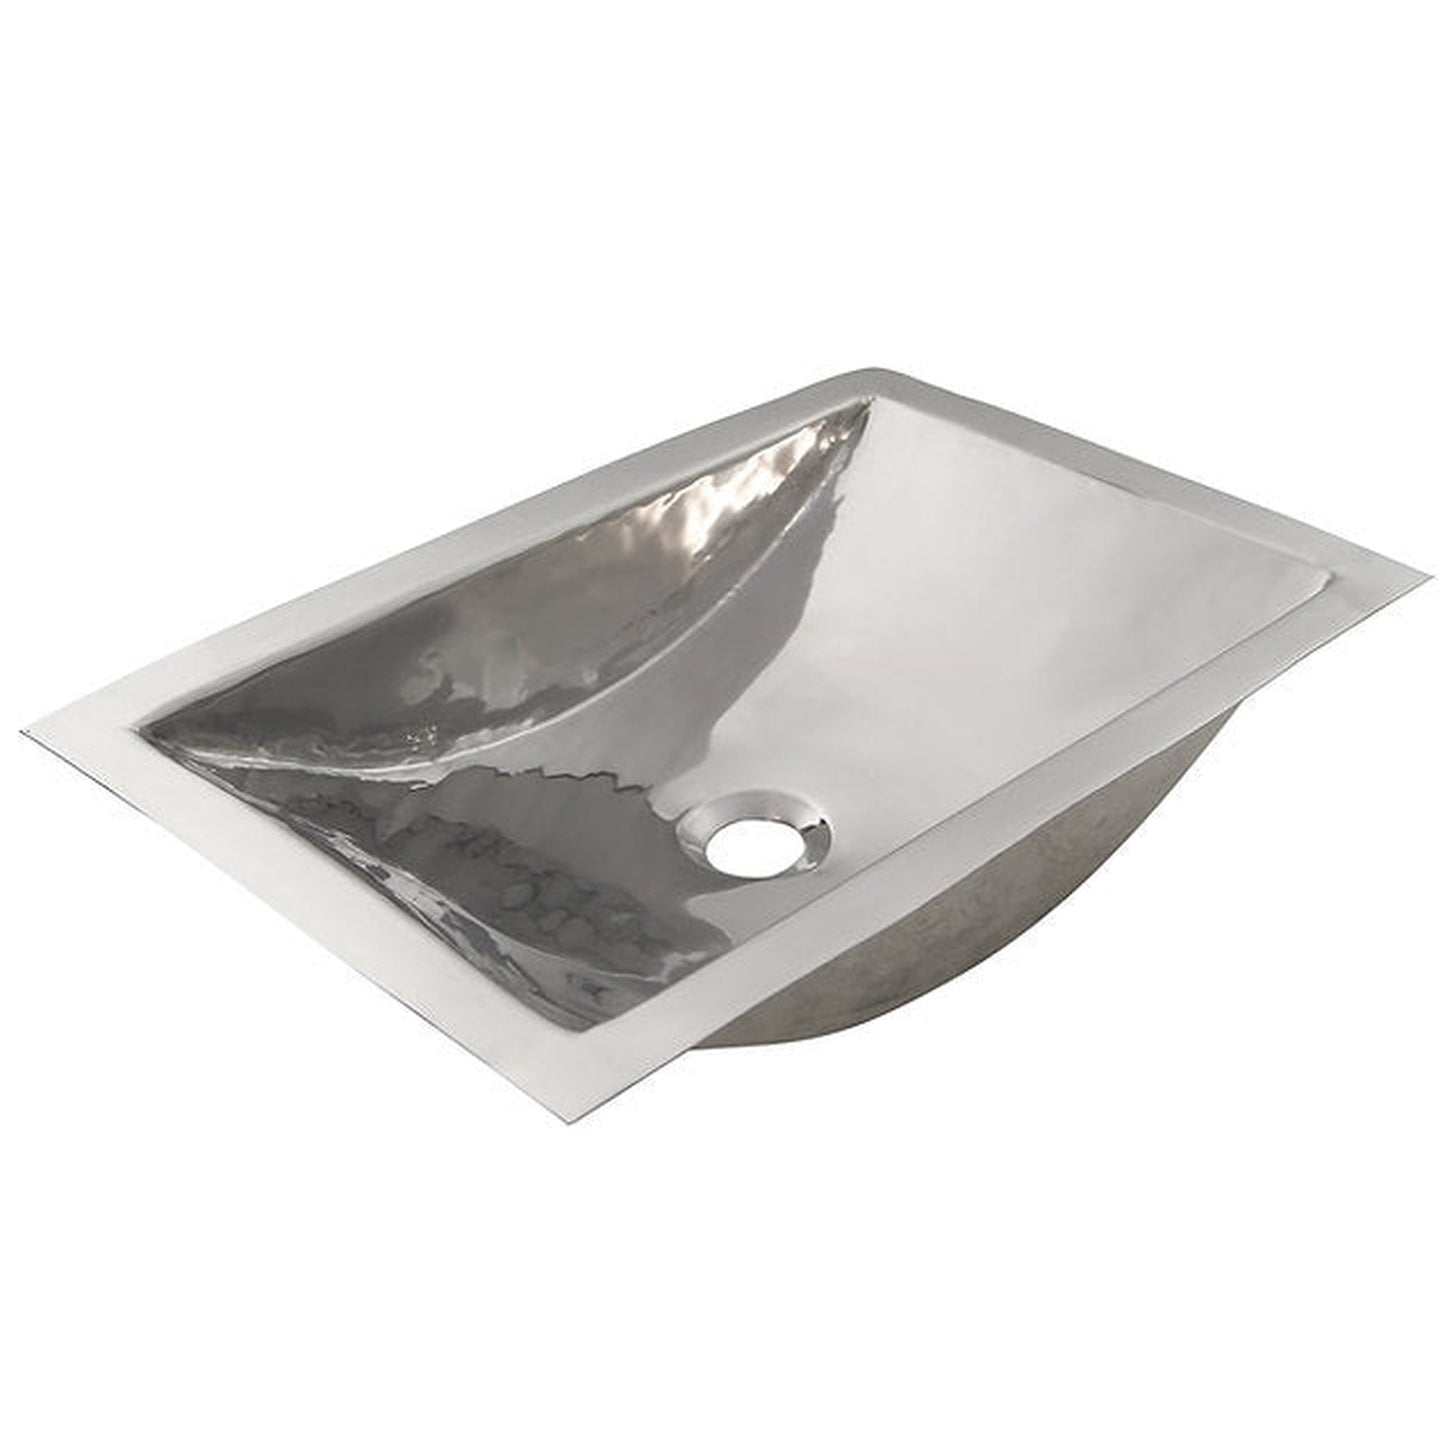 Nantucket Sinks Brightwork Home 20" W x 13" D" Rectangular Polished Stainless Steel Dualmount Sink